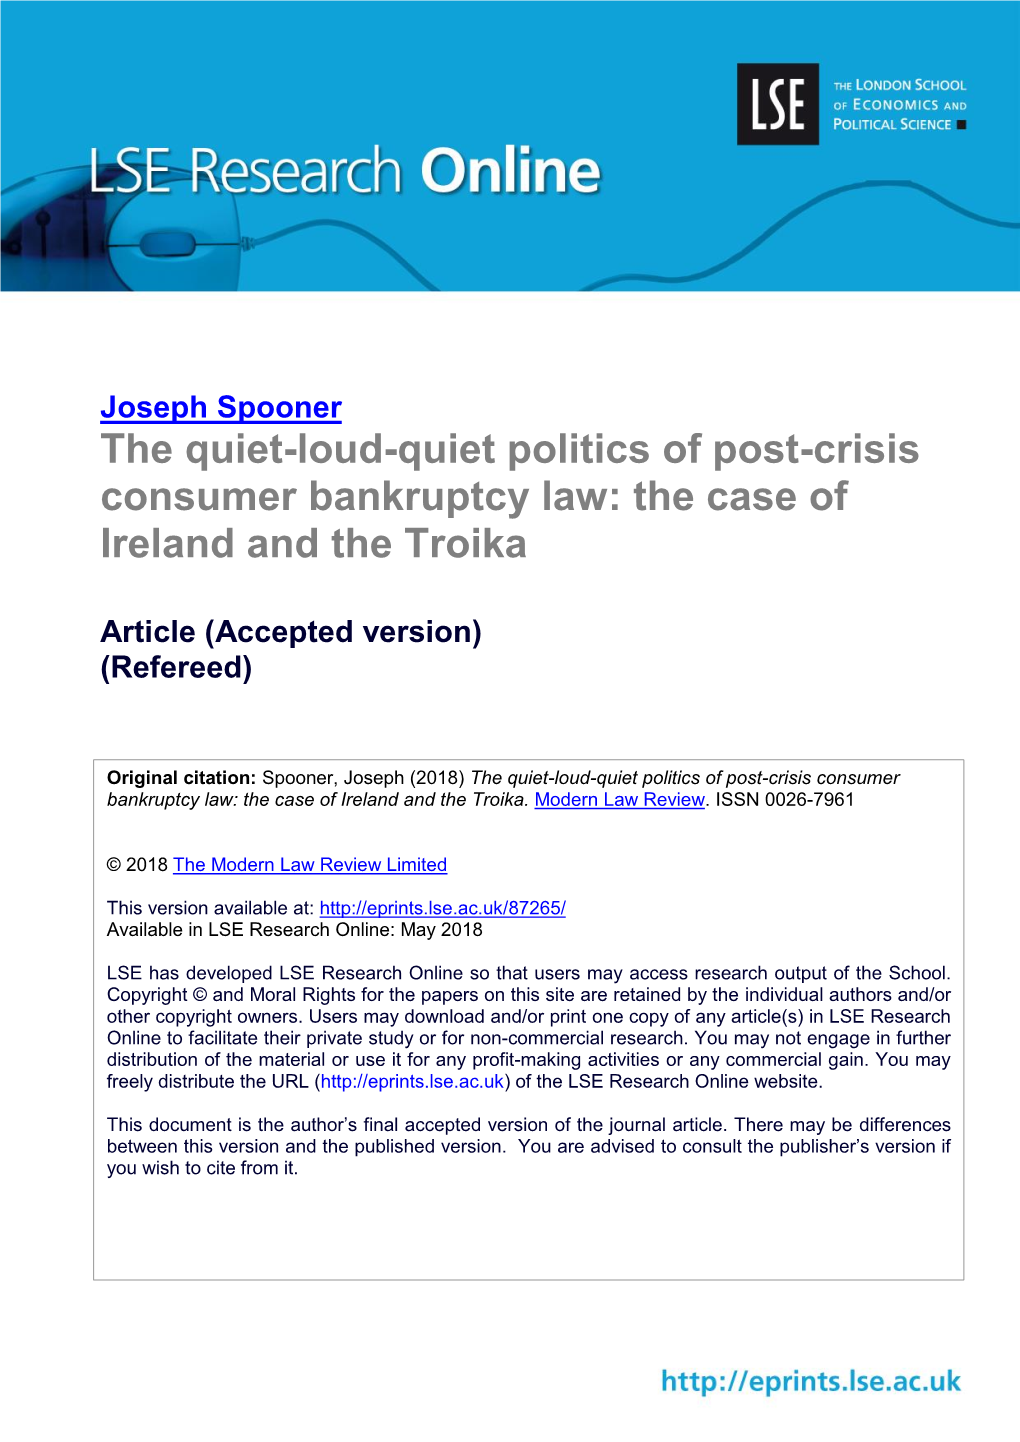 The Quiet-Loud-Quiet Politics of Post-Crisis Consumer Bankruptcy Law: the Case of Ireland and the Troika